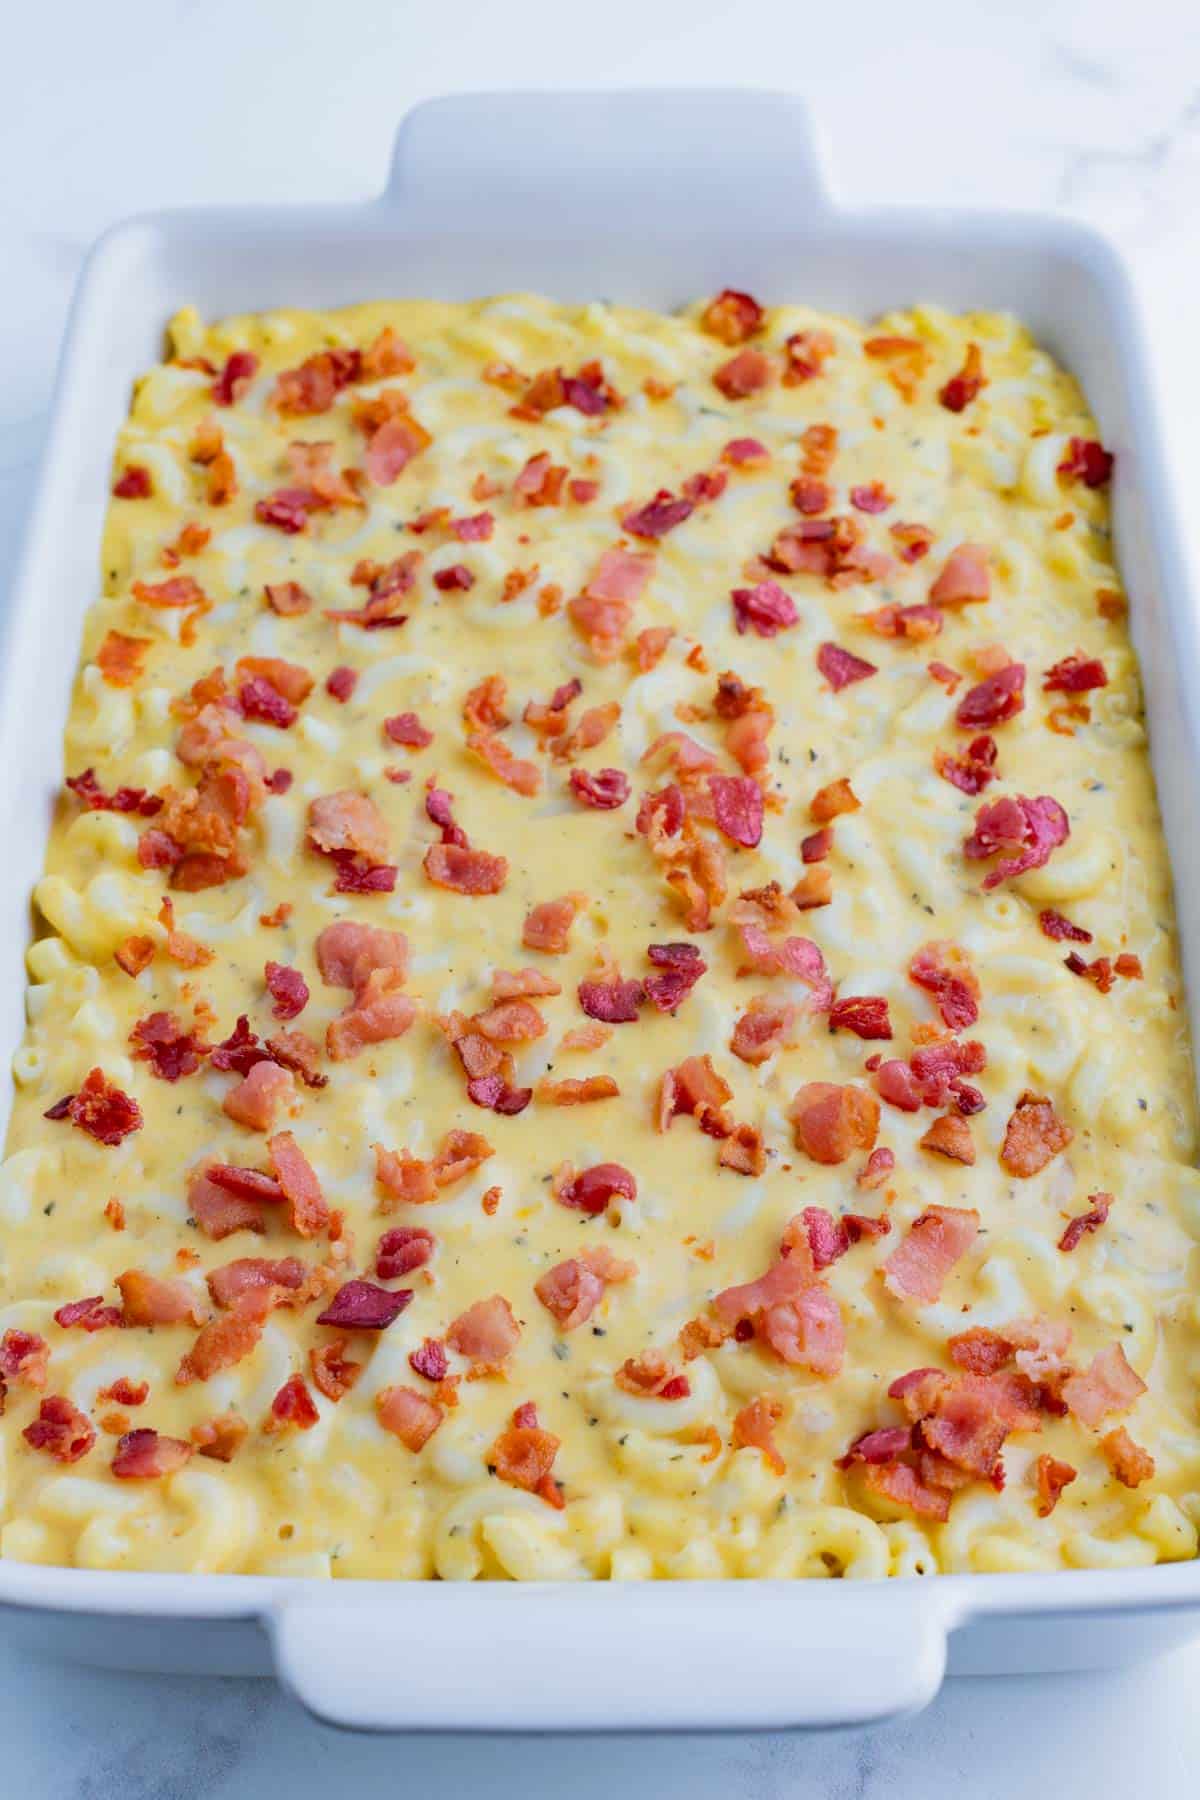 Cheesy noodles are added to a baking dish and topped with bacon.